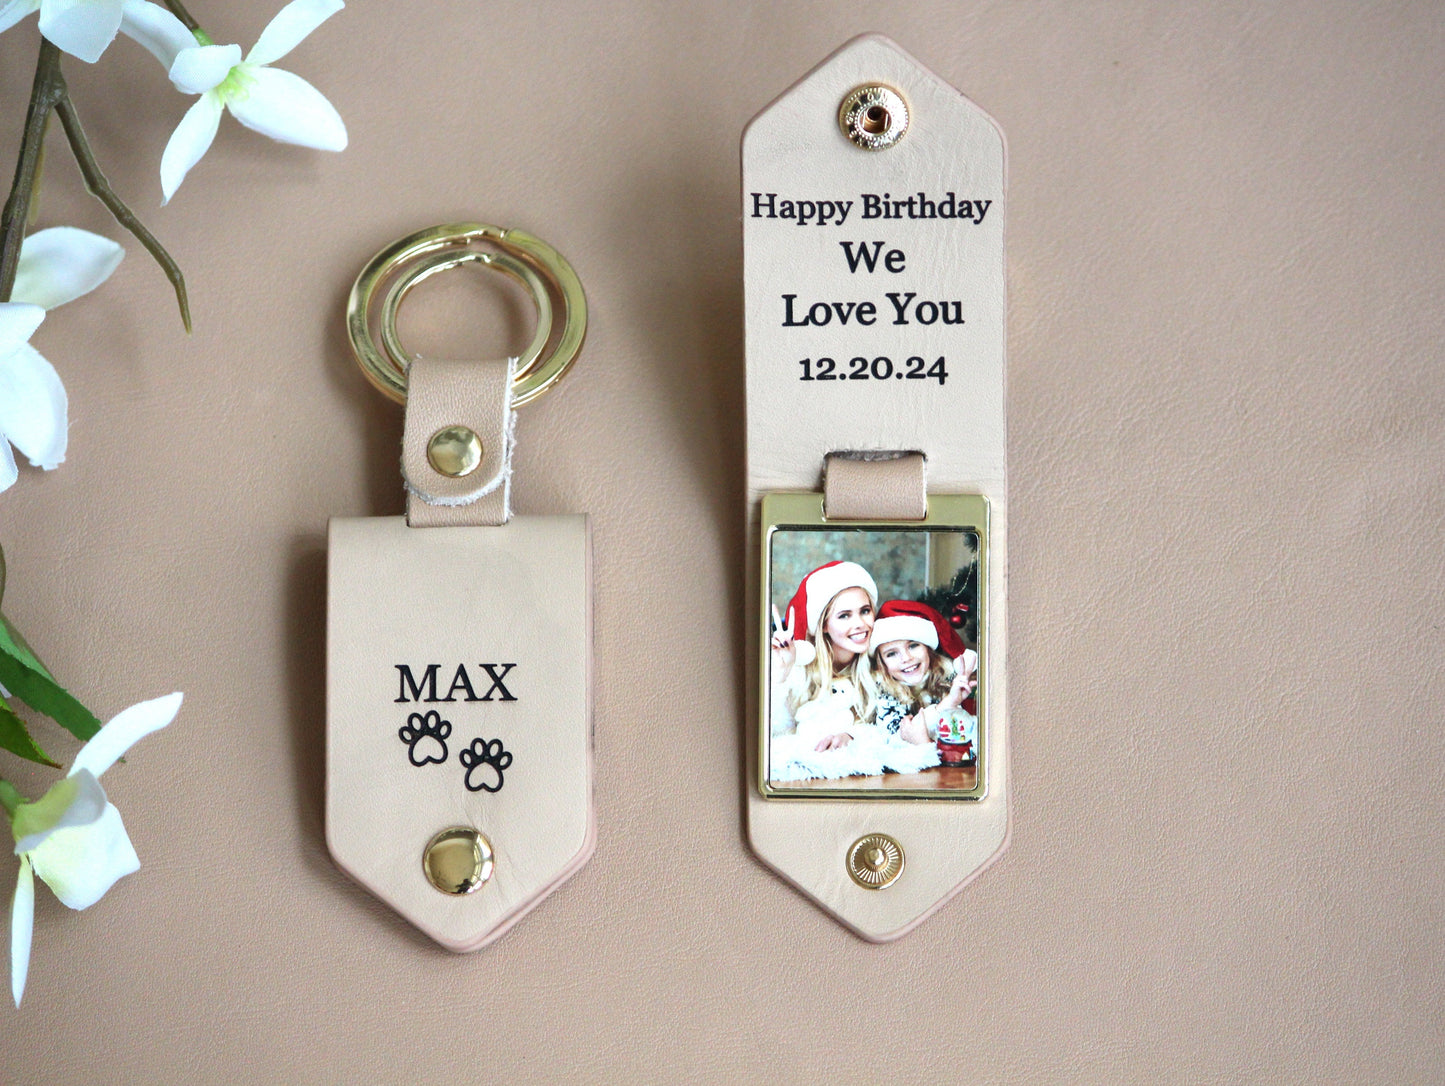 Personalized Photo Keychain Husband Boyfriend Engagement Anniversary Calendar, 1st Dating Date, Drive Safe Keychain, Christmas Gift for Men